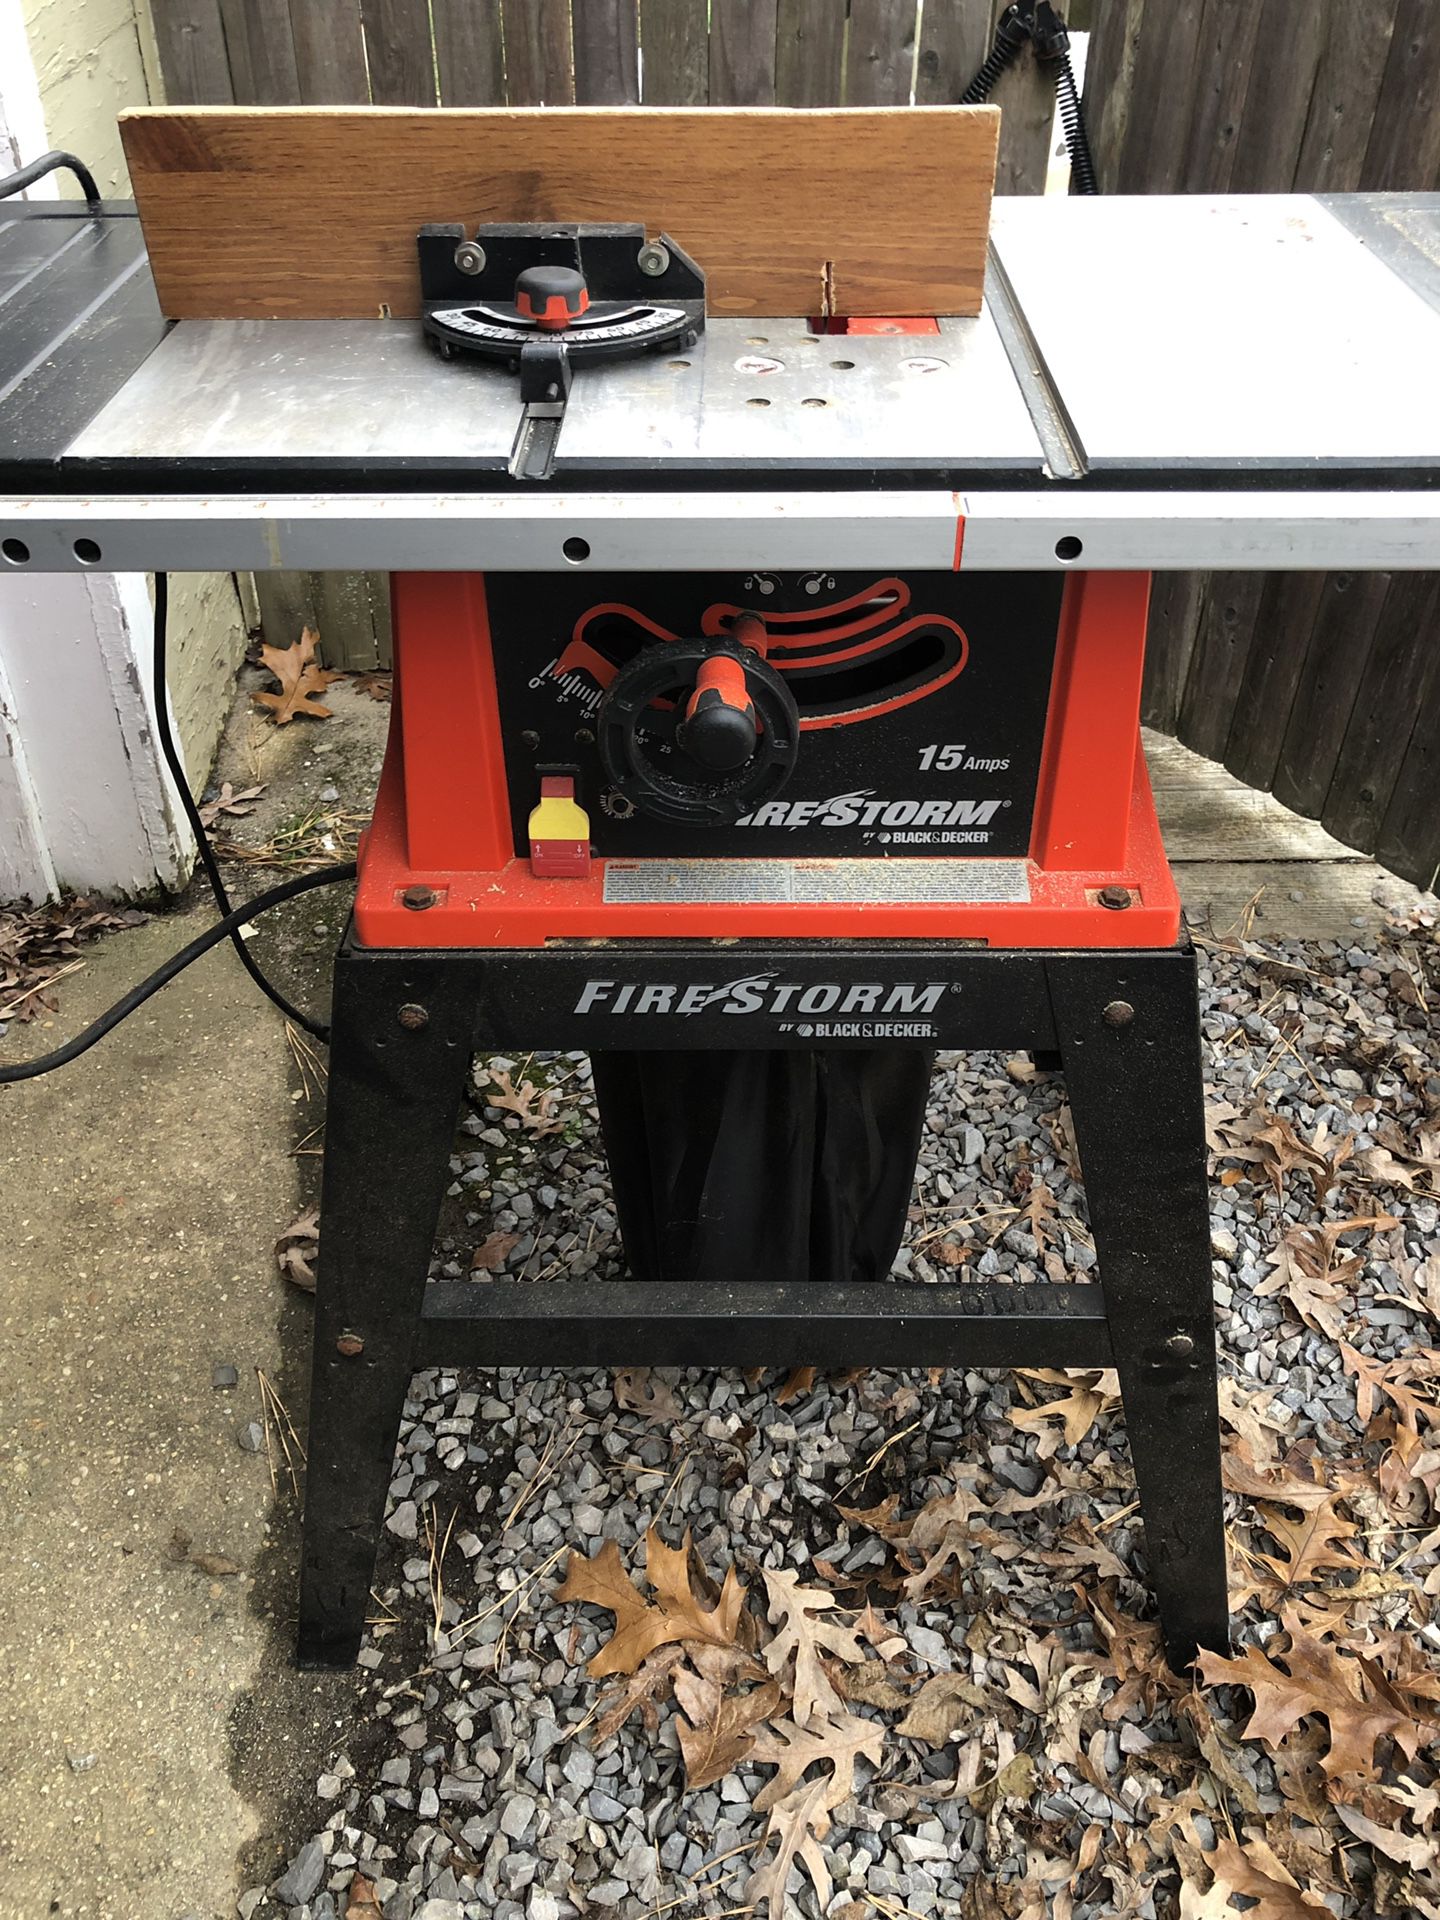 Black and decker firestorm table saw for Sale in Brick, NJ - OfferUp